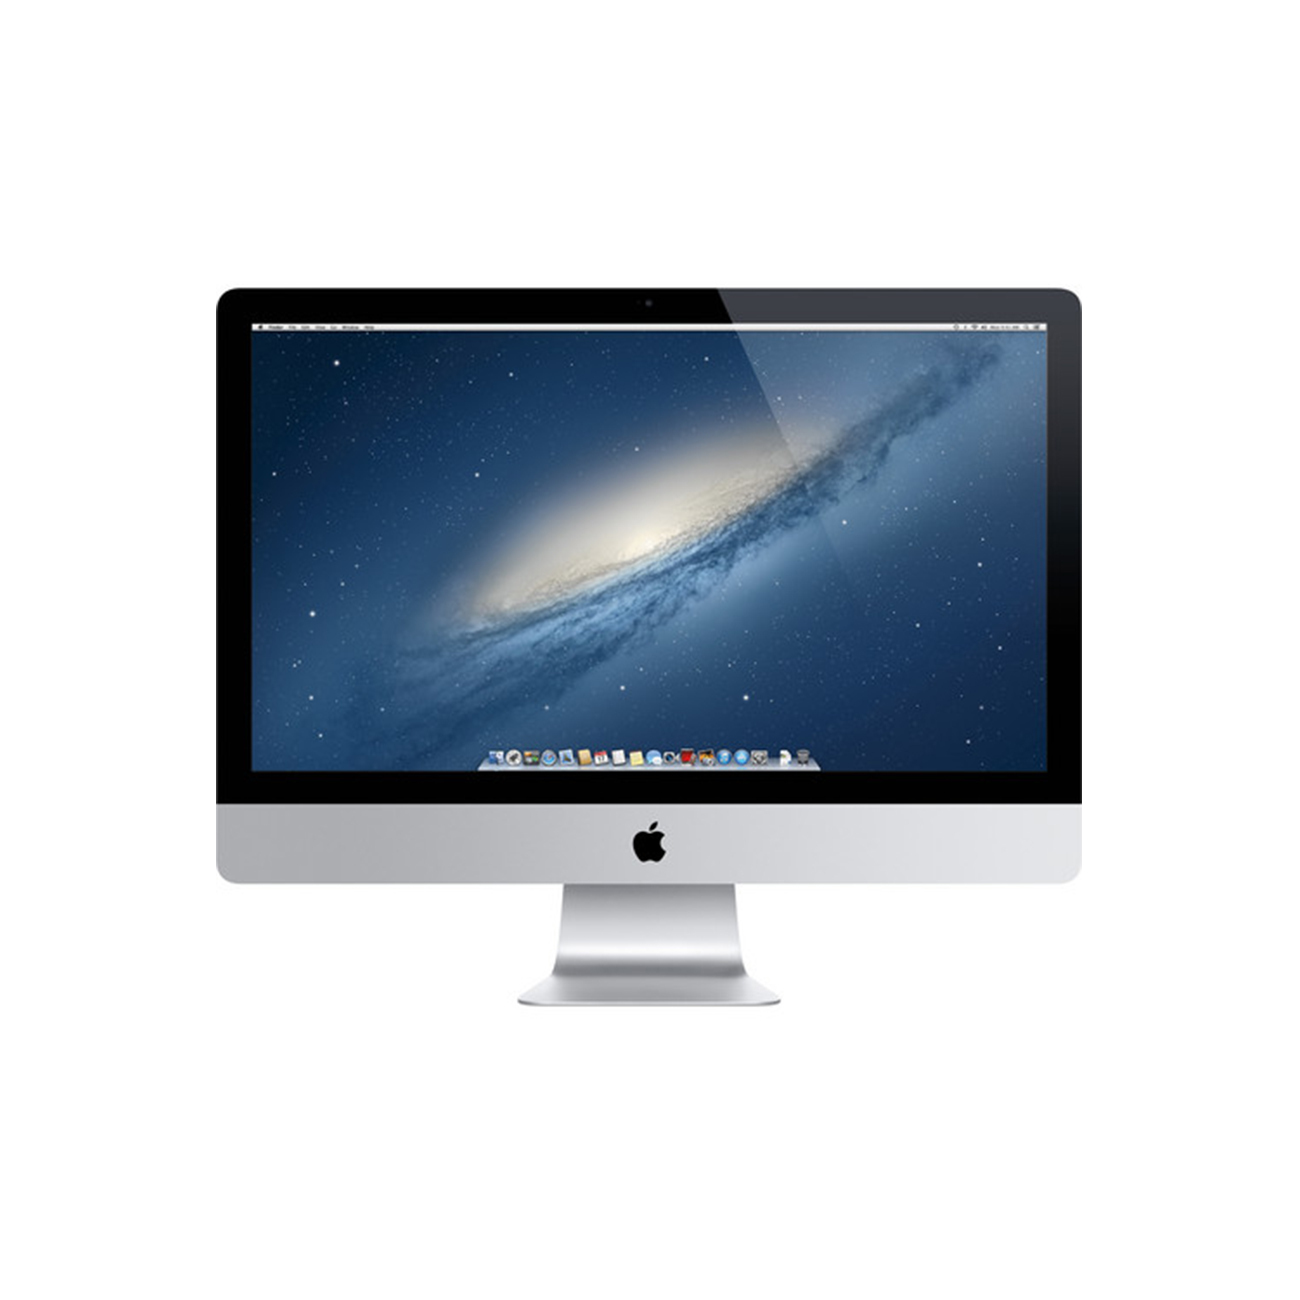 iMac 21.5" 2013 - Excellent / Very Good / Good Condition